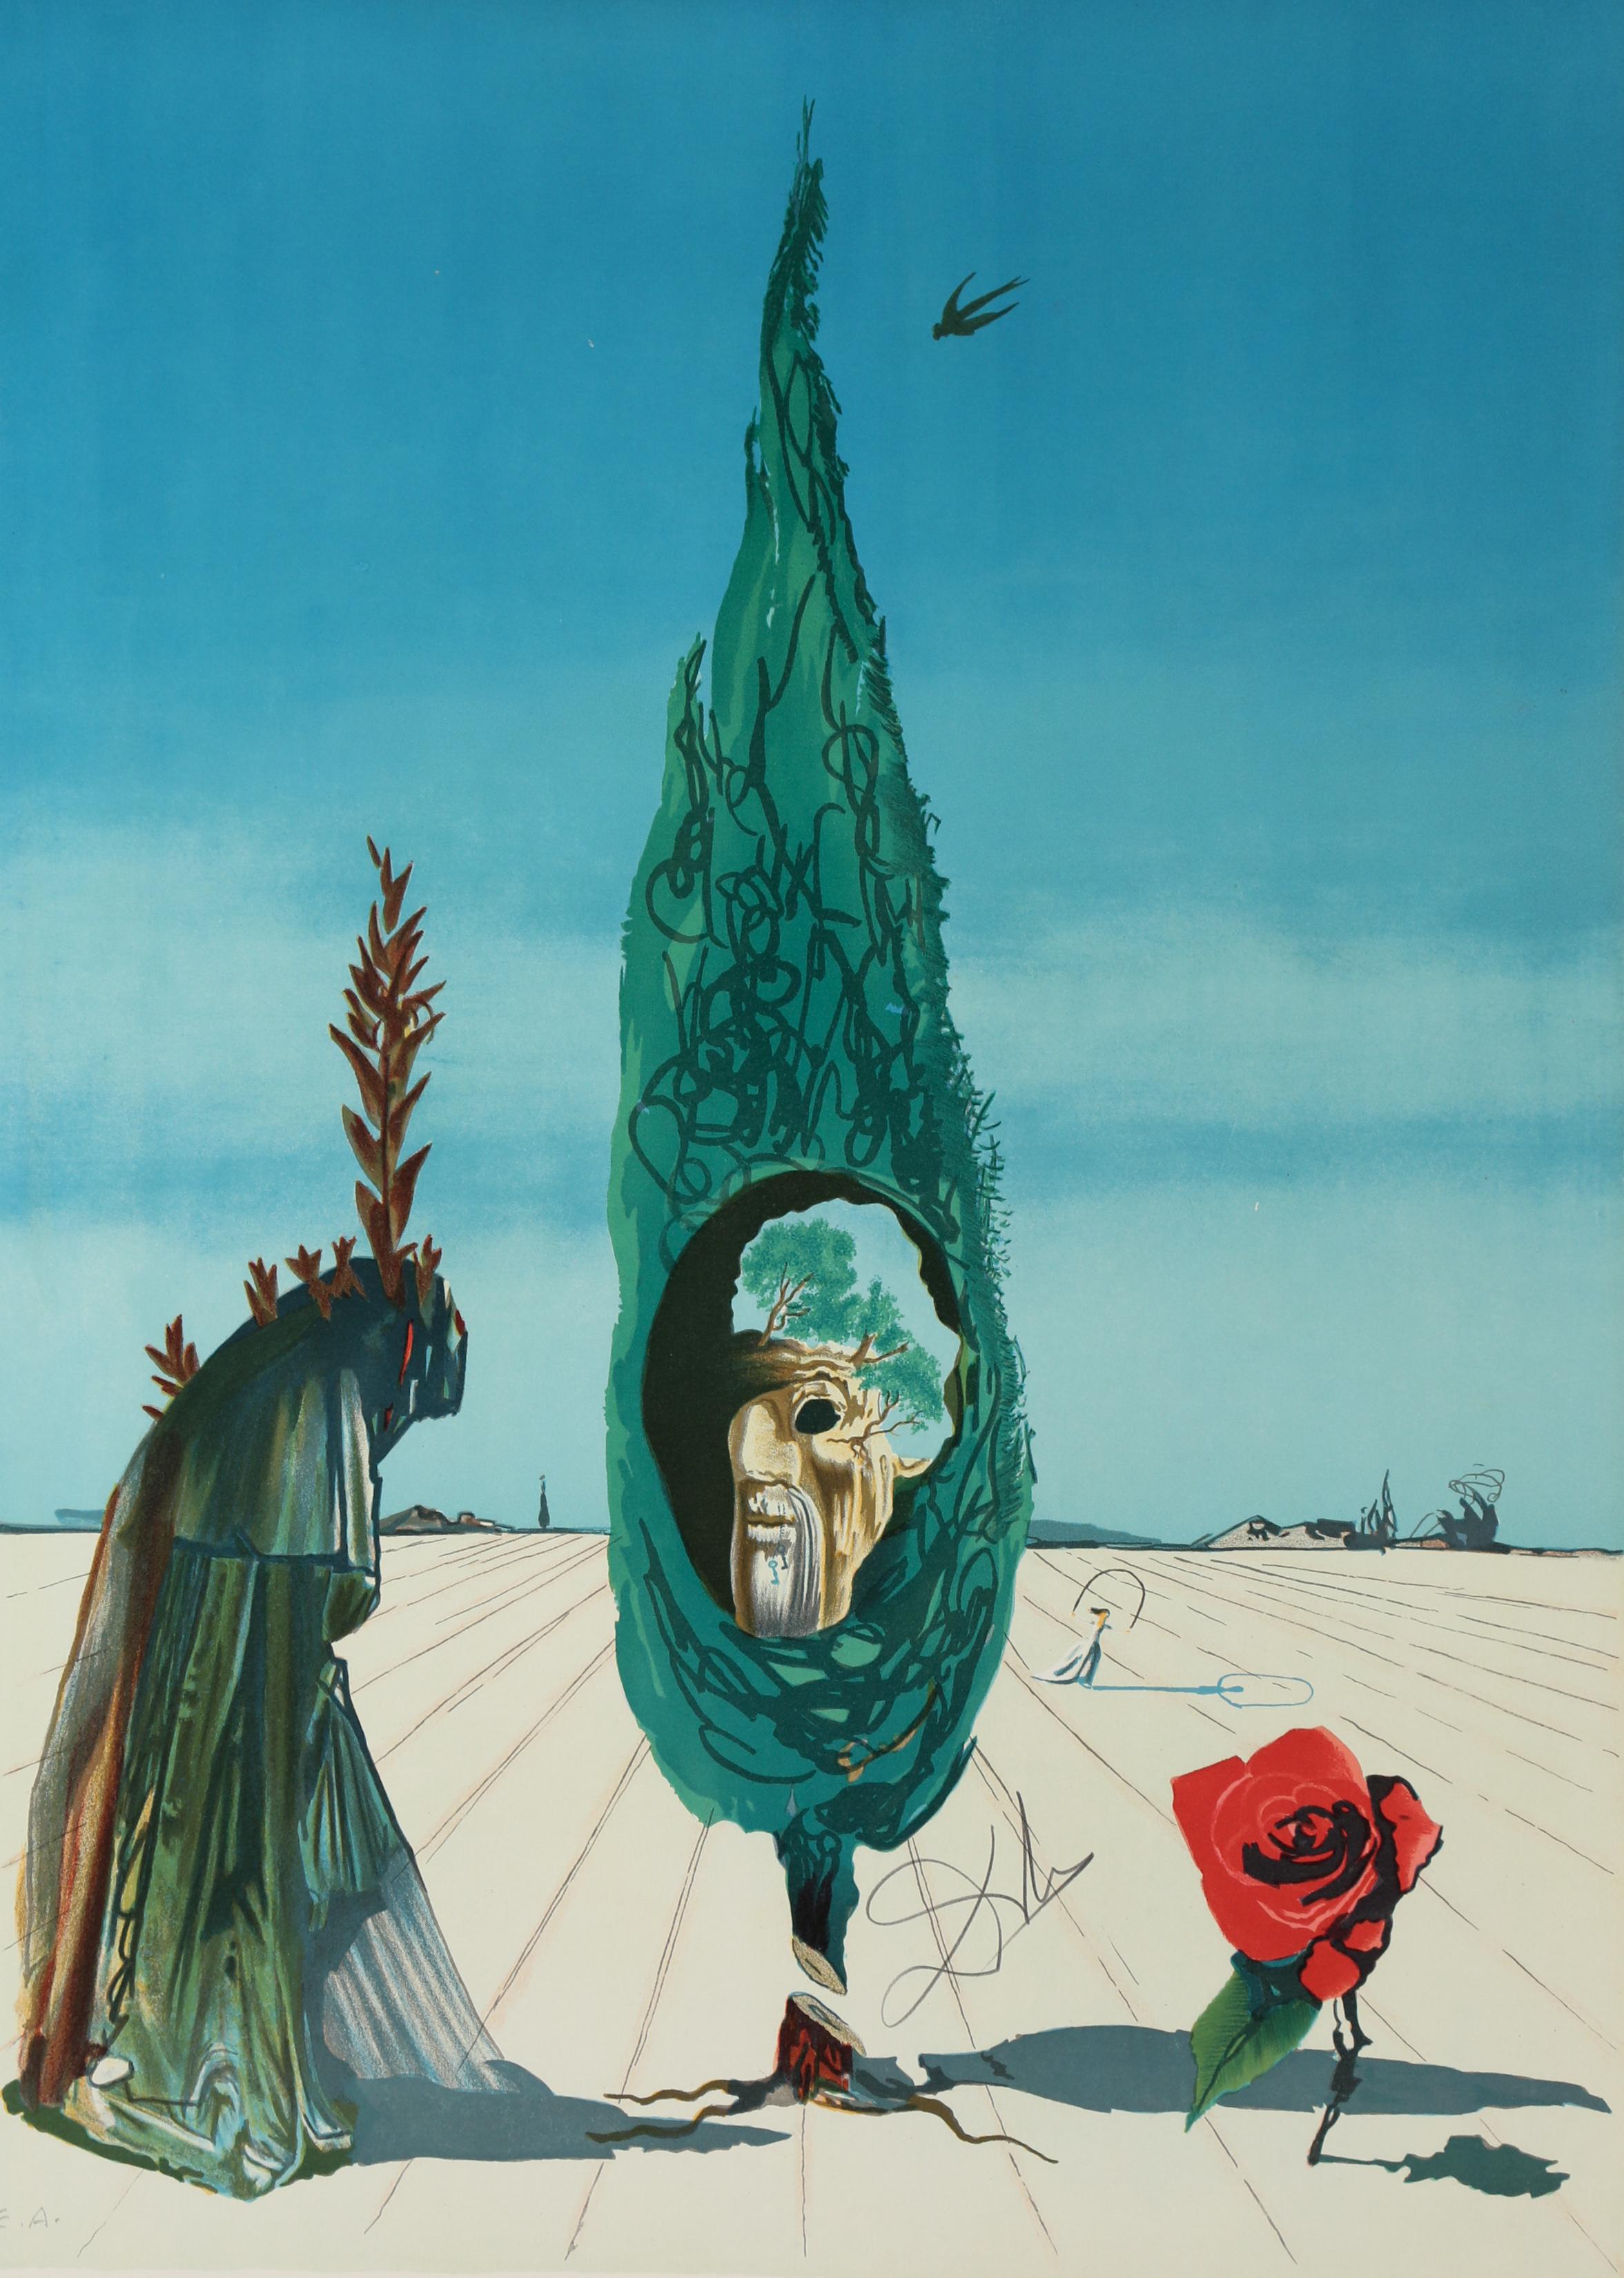 Salvador Dalí Abstract Print - Enigma of the Rose